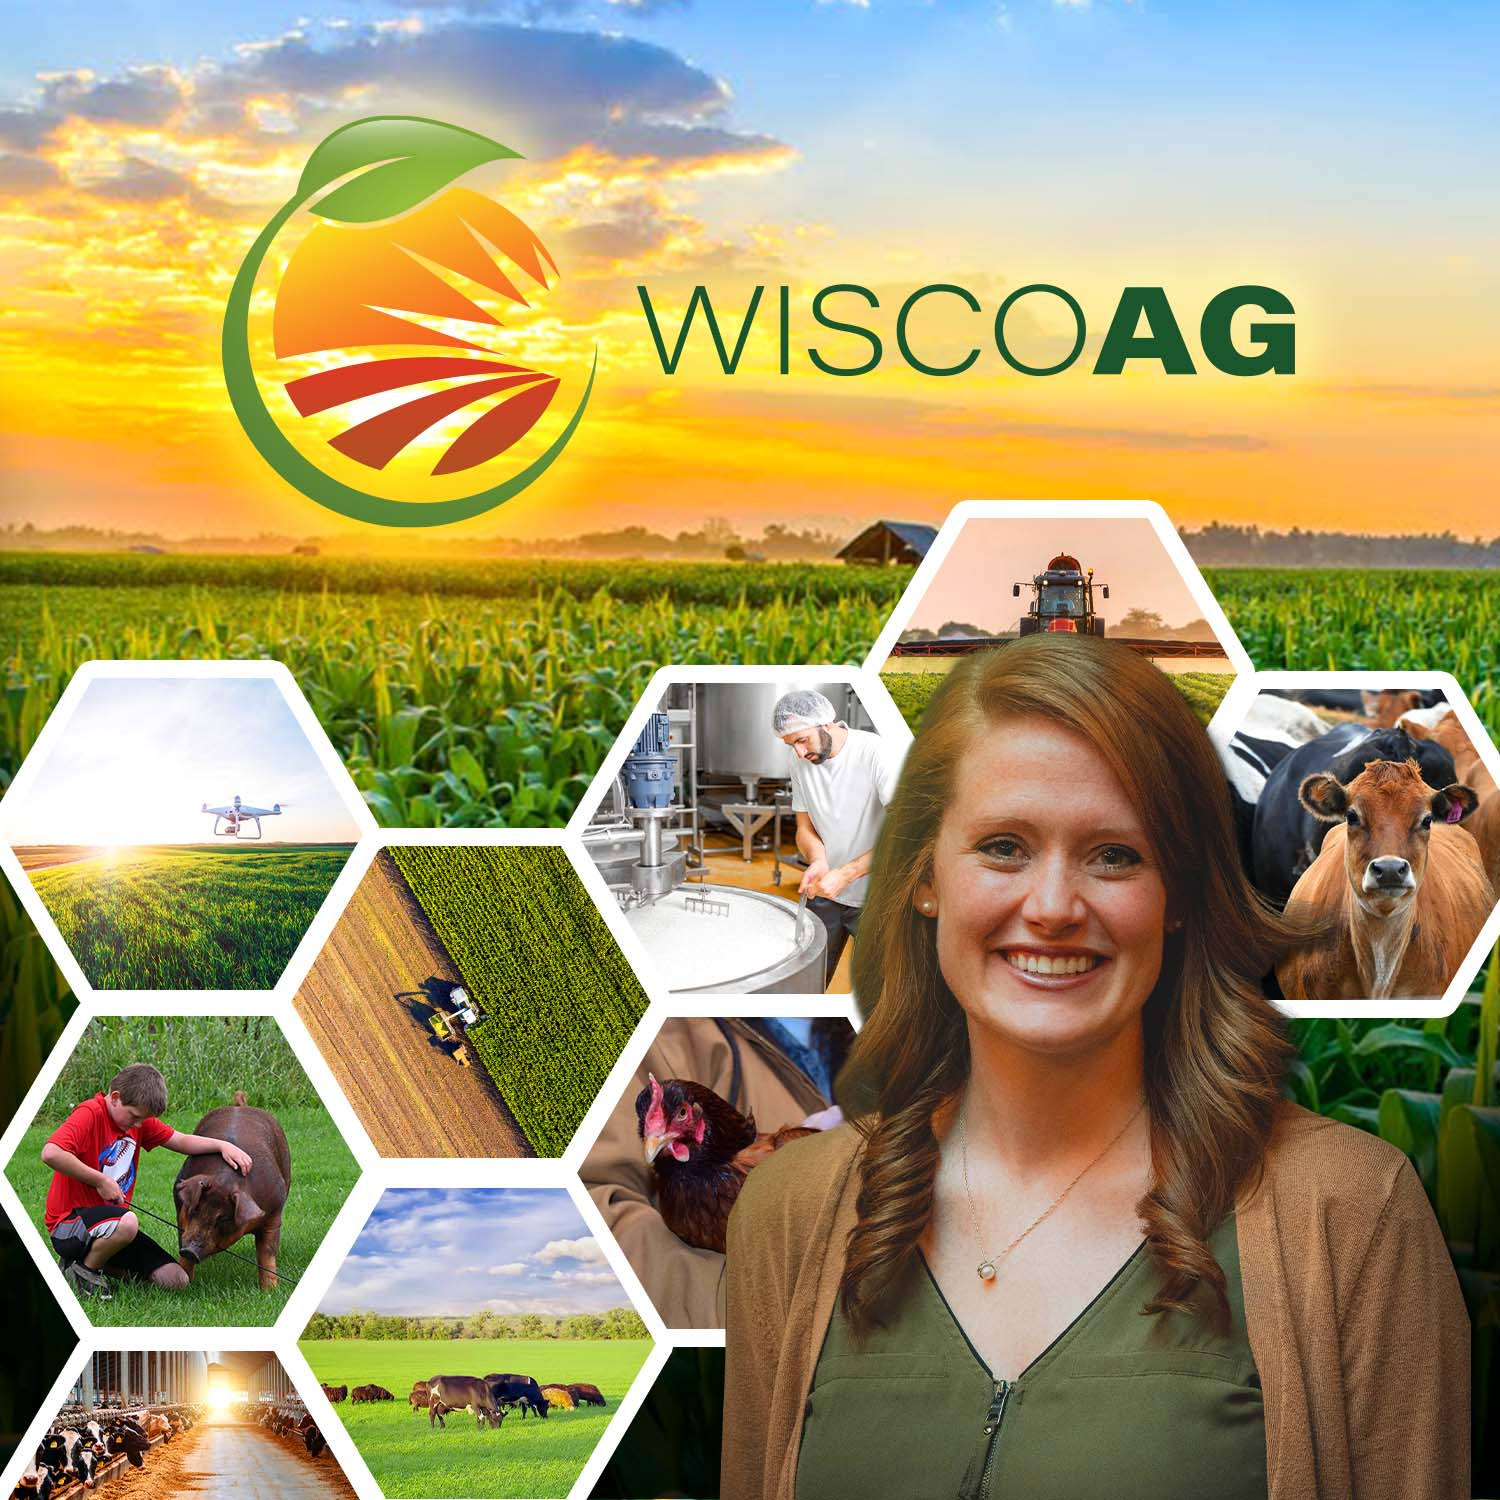 Wisconsin's New LLC Act goes into effect on Jan. 1, 2023